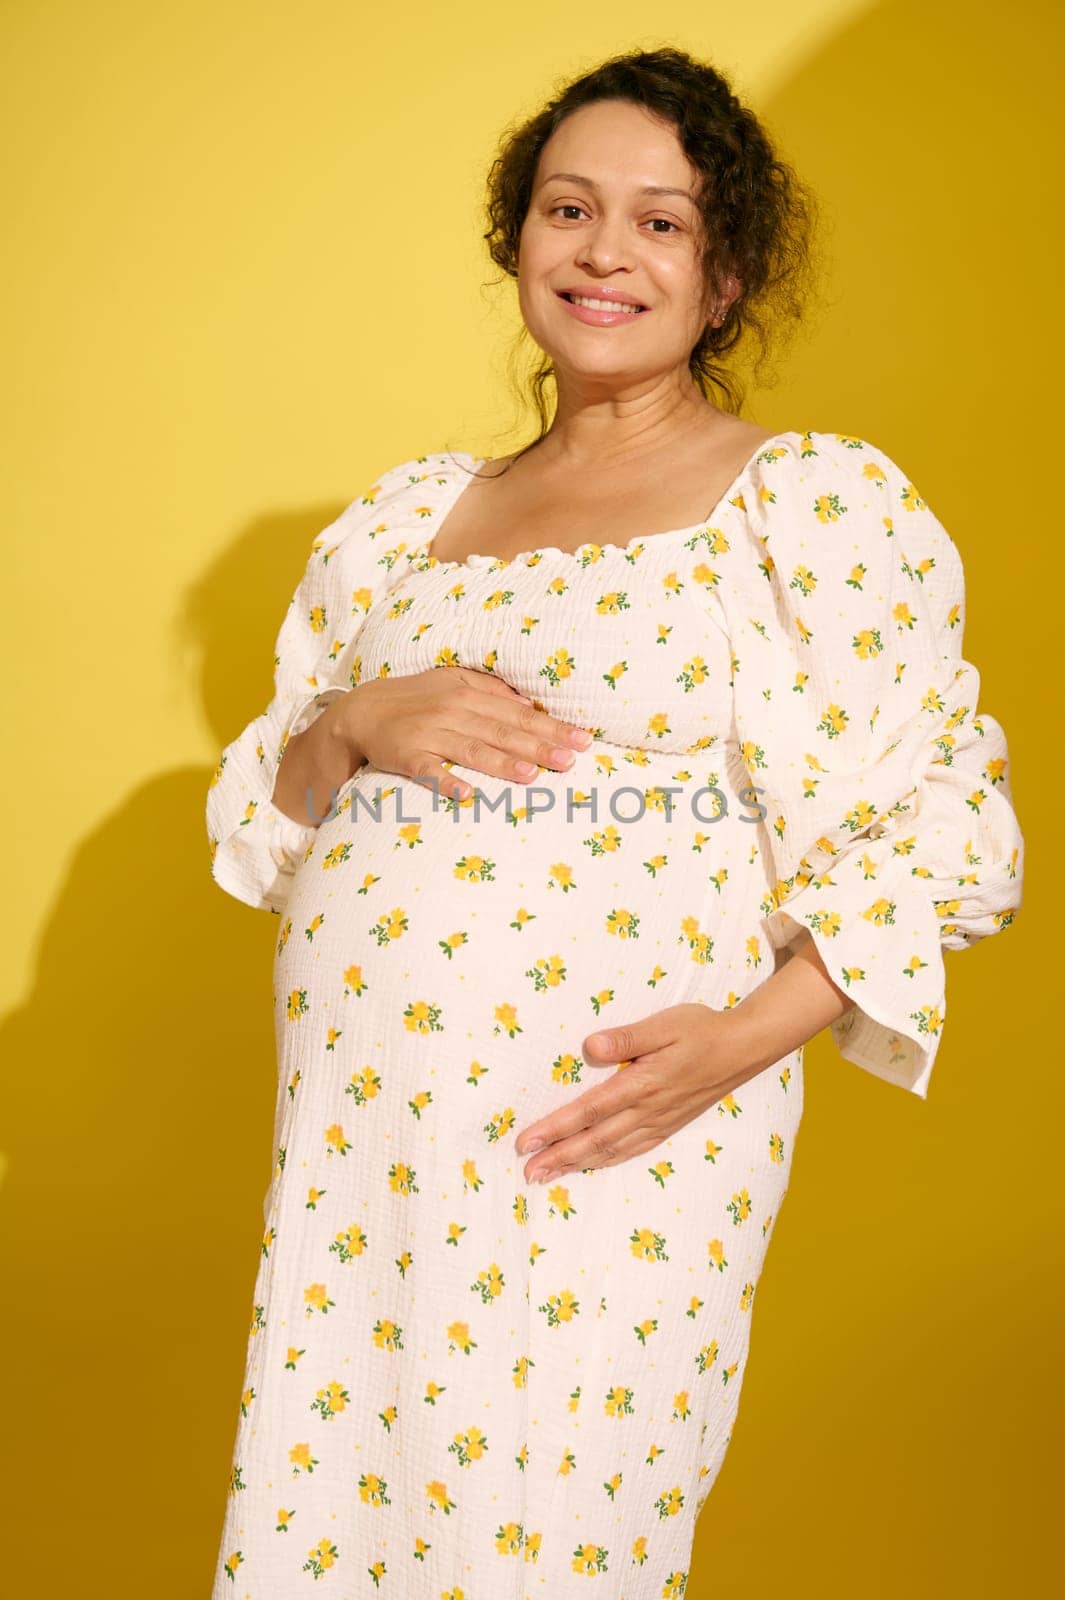 Beautiful multi-ethnic curly haired pregnant woman in stylish summer sundress, gently caresses her belly, smiles looking at camera, isolated on yellow background. Expecting a baby. Childbearing.